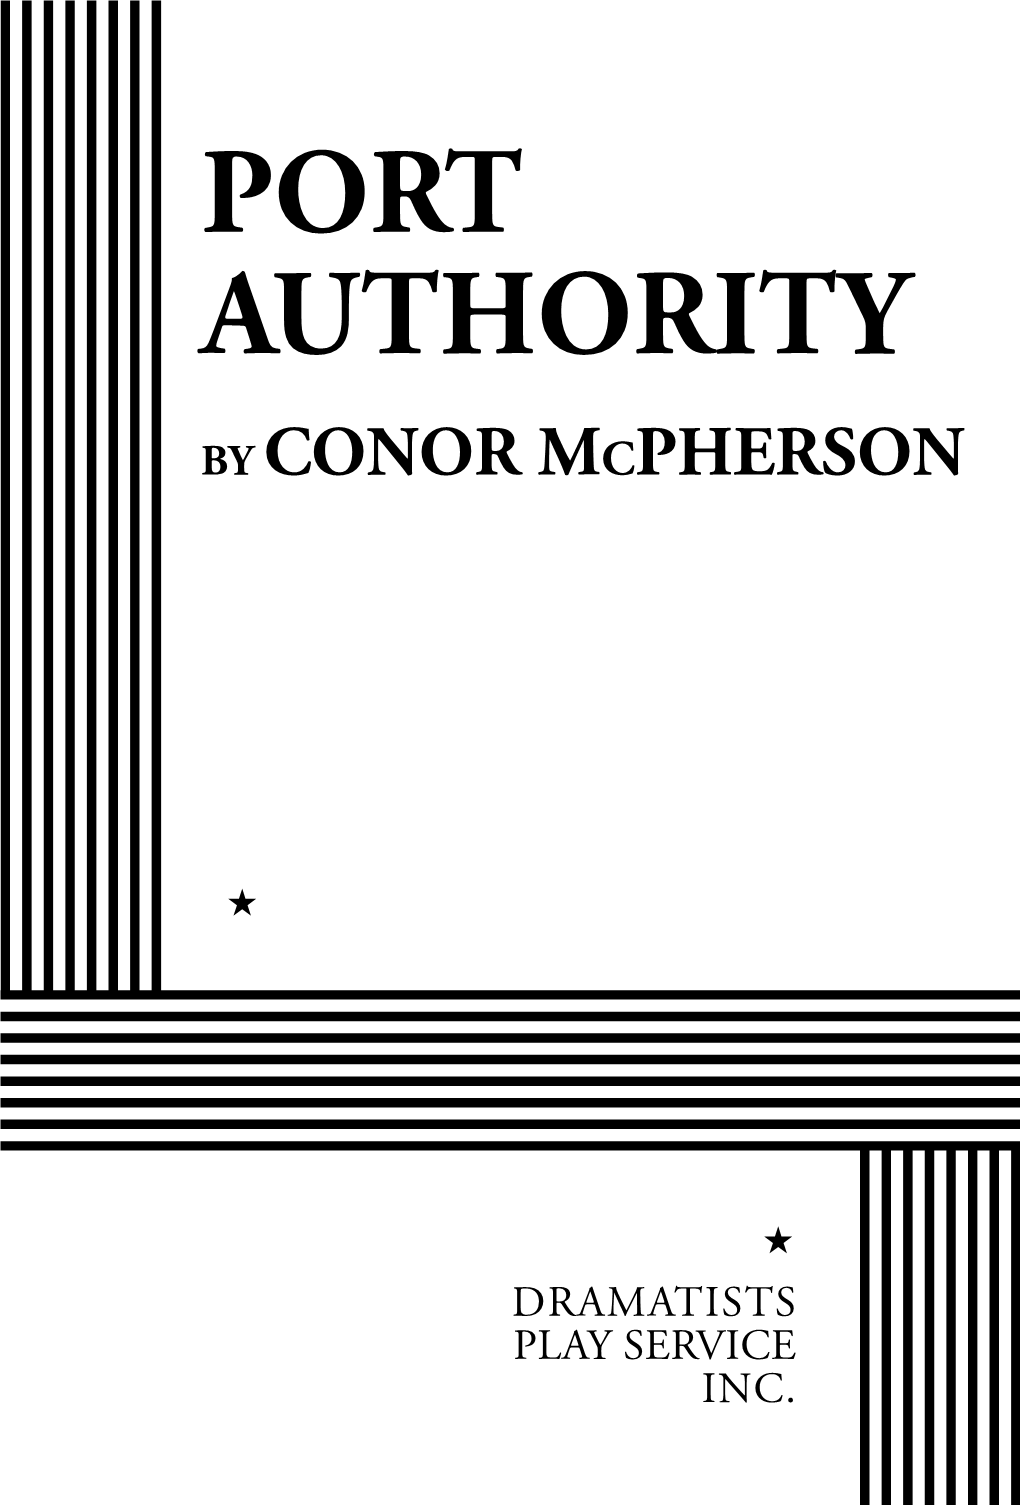 Port Authority by Conor Mcpherson